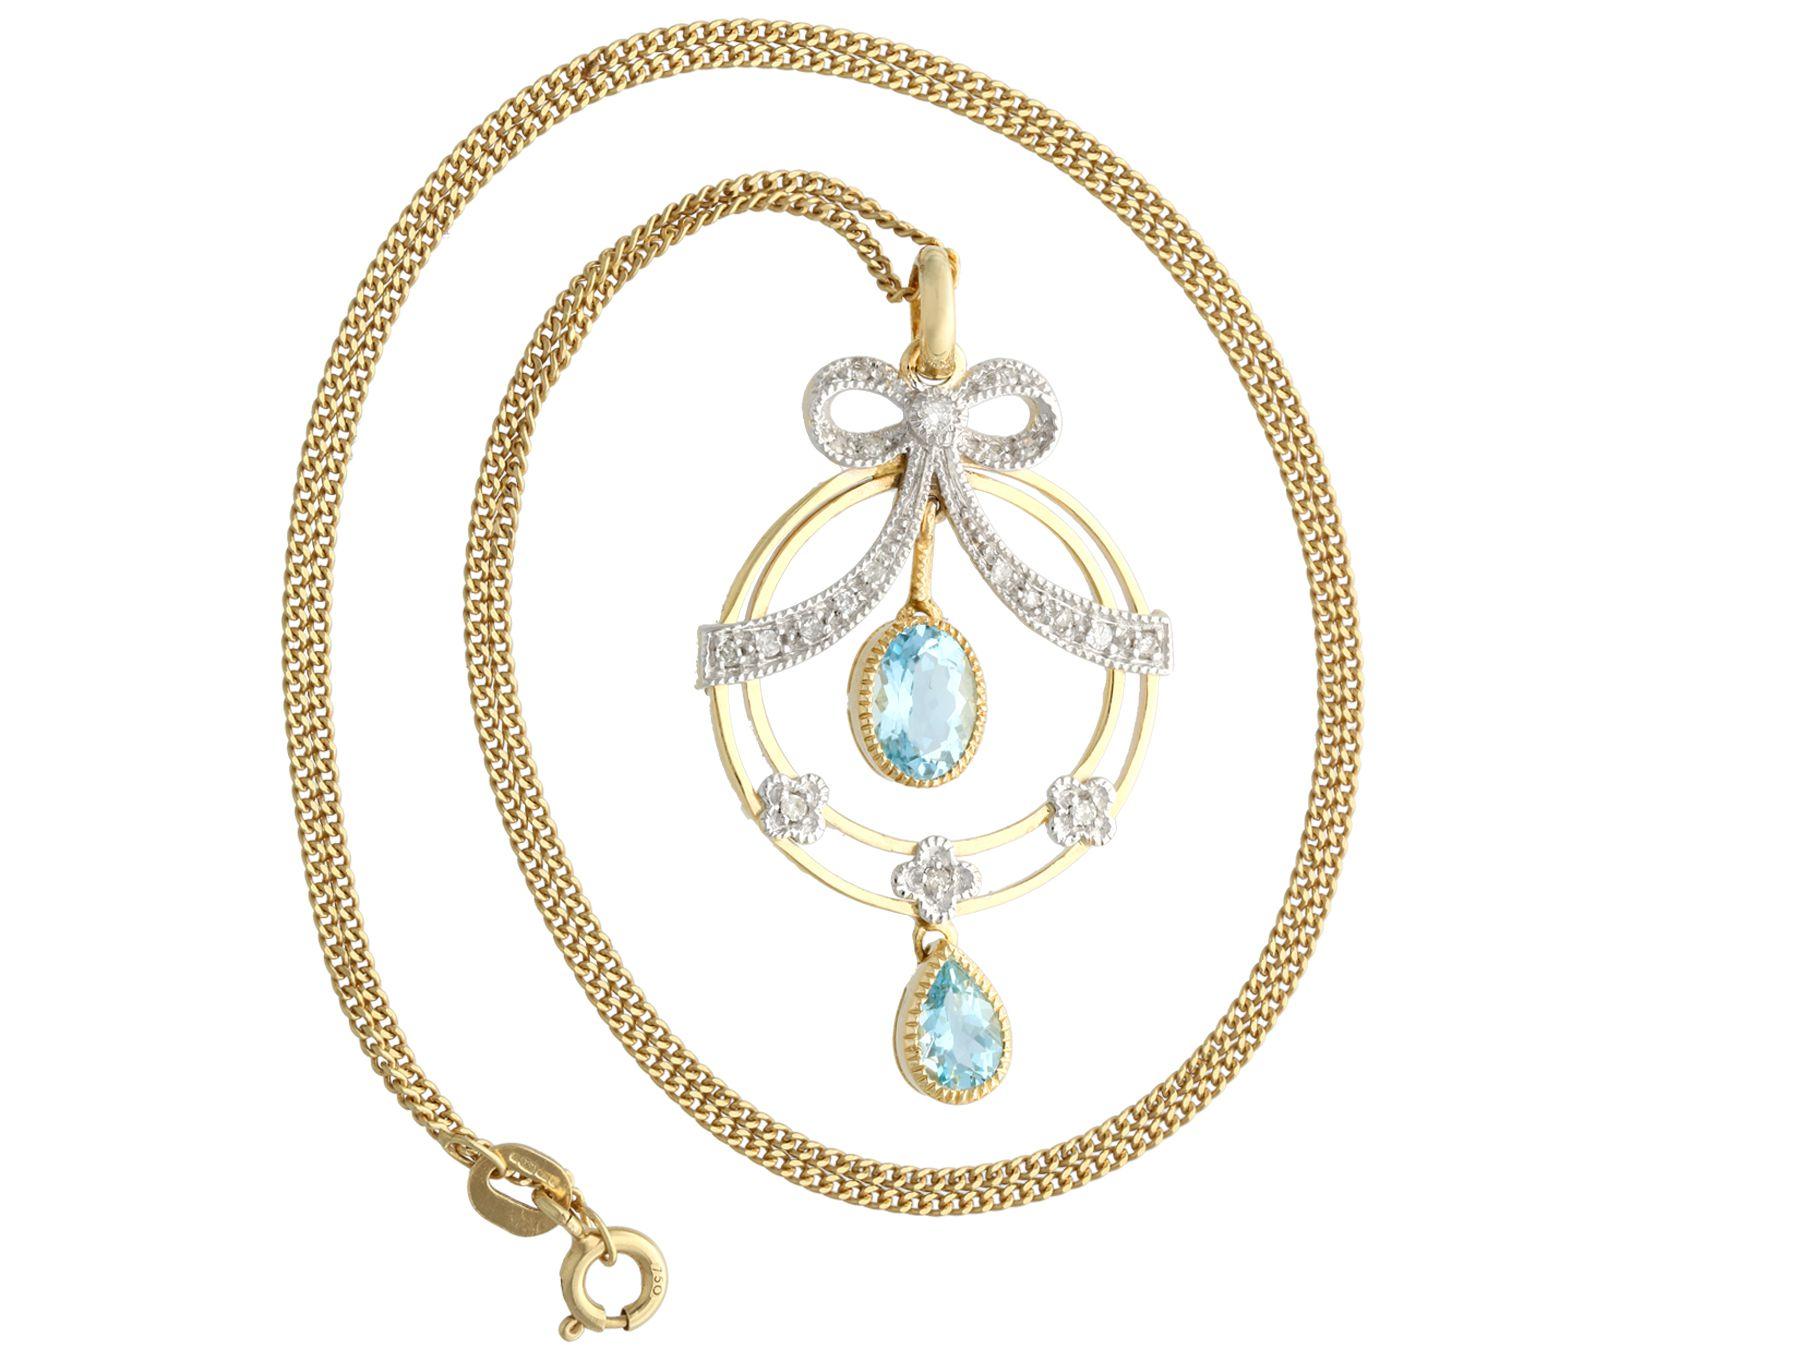 A fine and impressive contemporary 0.18 carat diamond and 1.01 carat aquamarine, 9 karat gold pendant in the antique style; part of our diverse antique jewelry collections.

This fine and impressive oval cut aquamarine pendant has been crafted in 9k